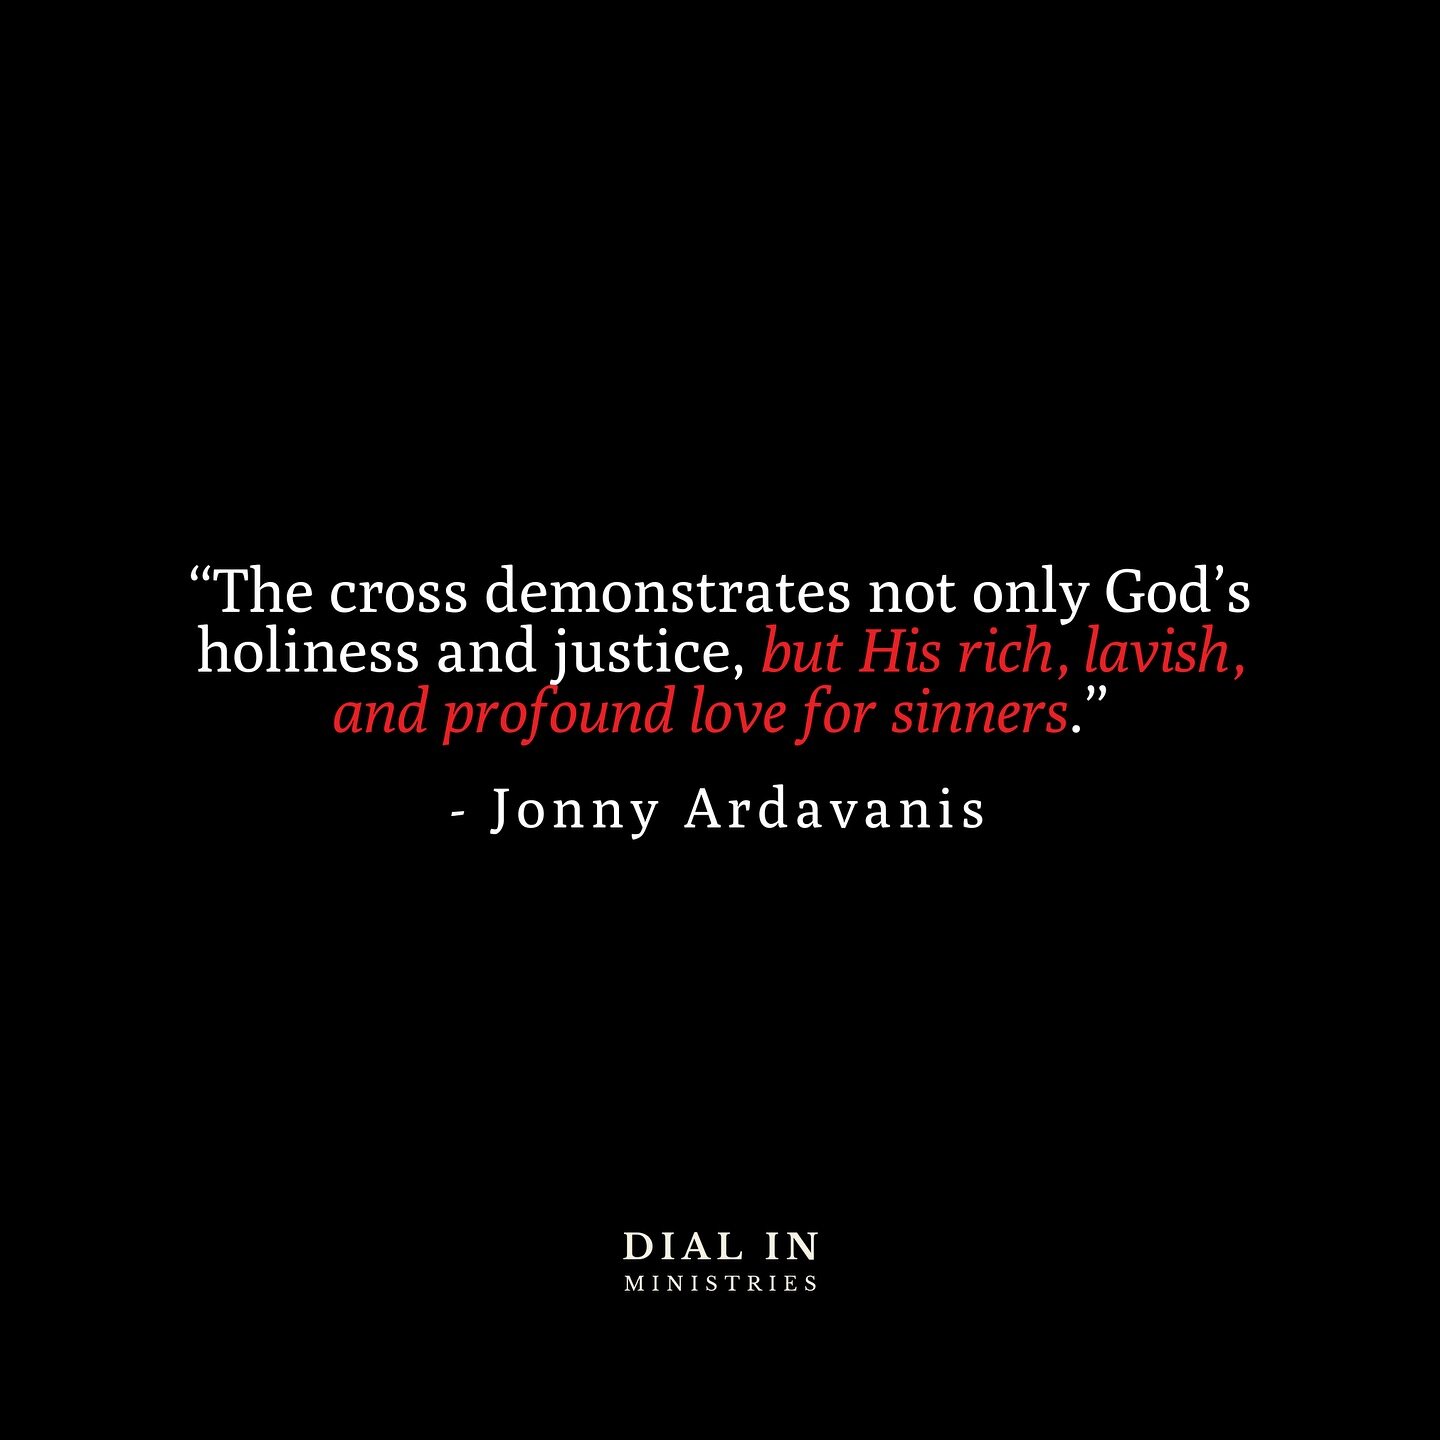 &ldquo;The cross demonstrates not only God&rsquo;s holiness and justice, but His rich, lavish, and profound love for sinners.&rdquo; - @jonnyardavanis 

From Episode &ldquo;Why did Jesus Have To Die?&rdquo;